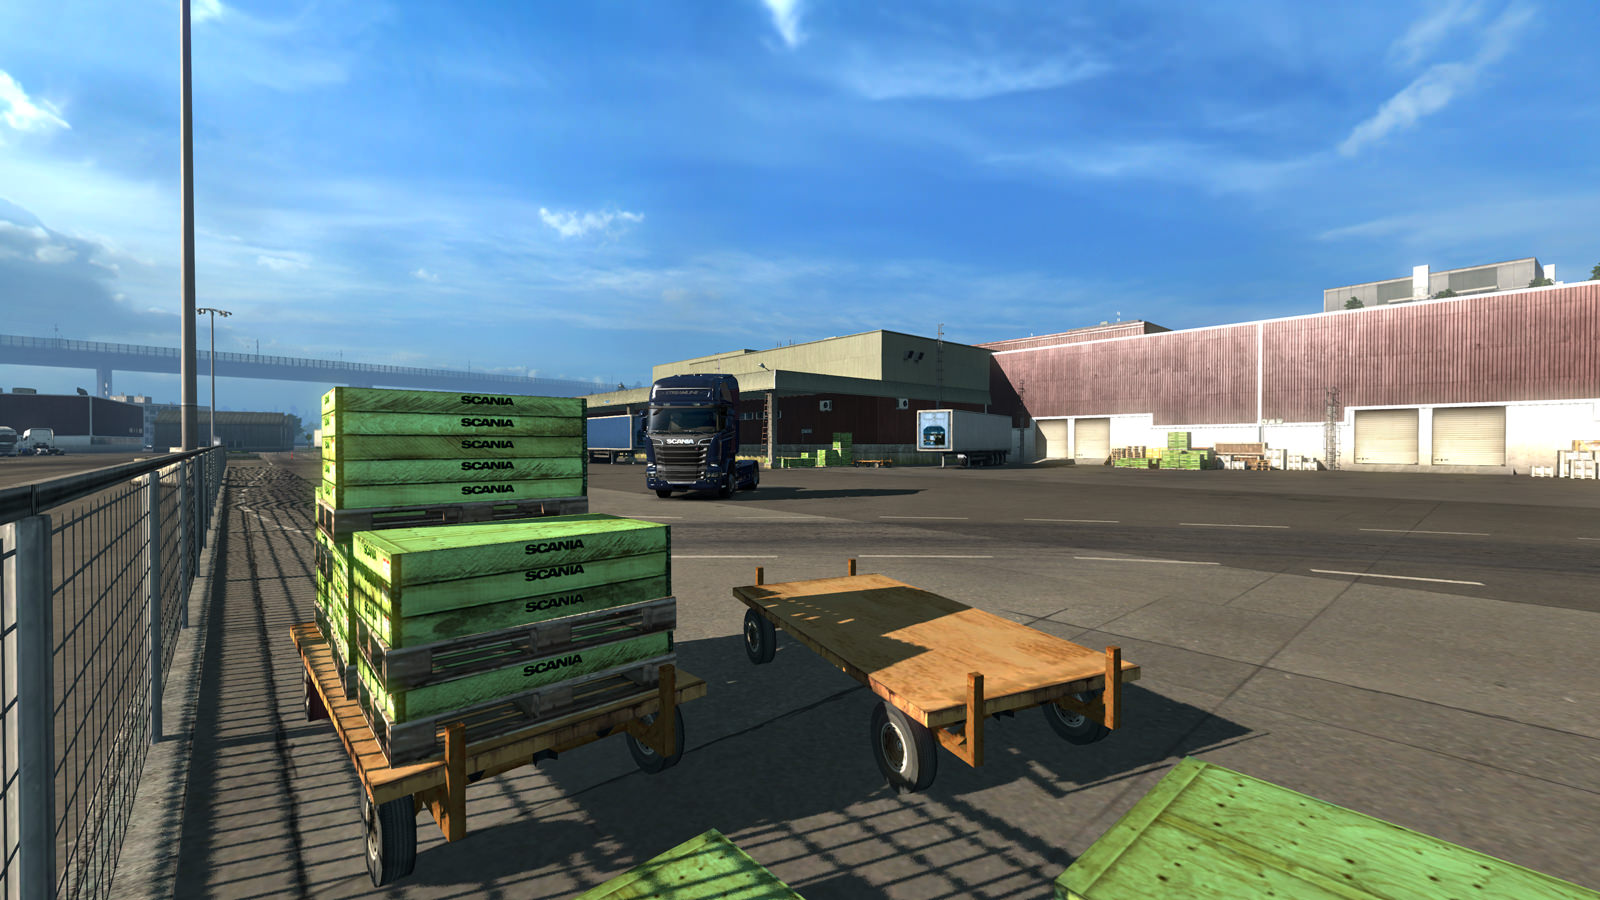 ets2_scania_factory_midday_04.jpg